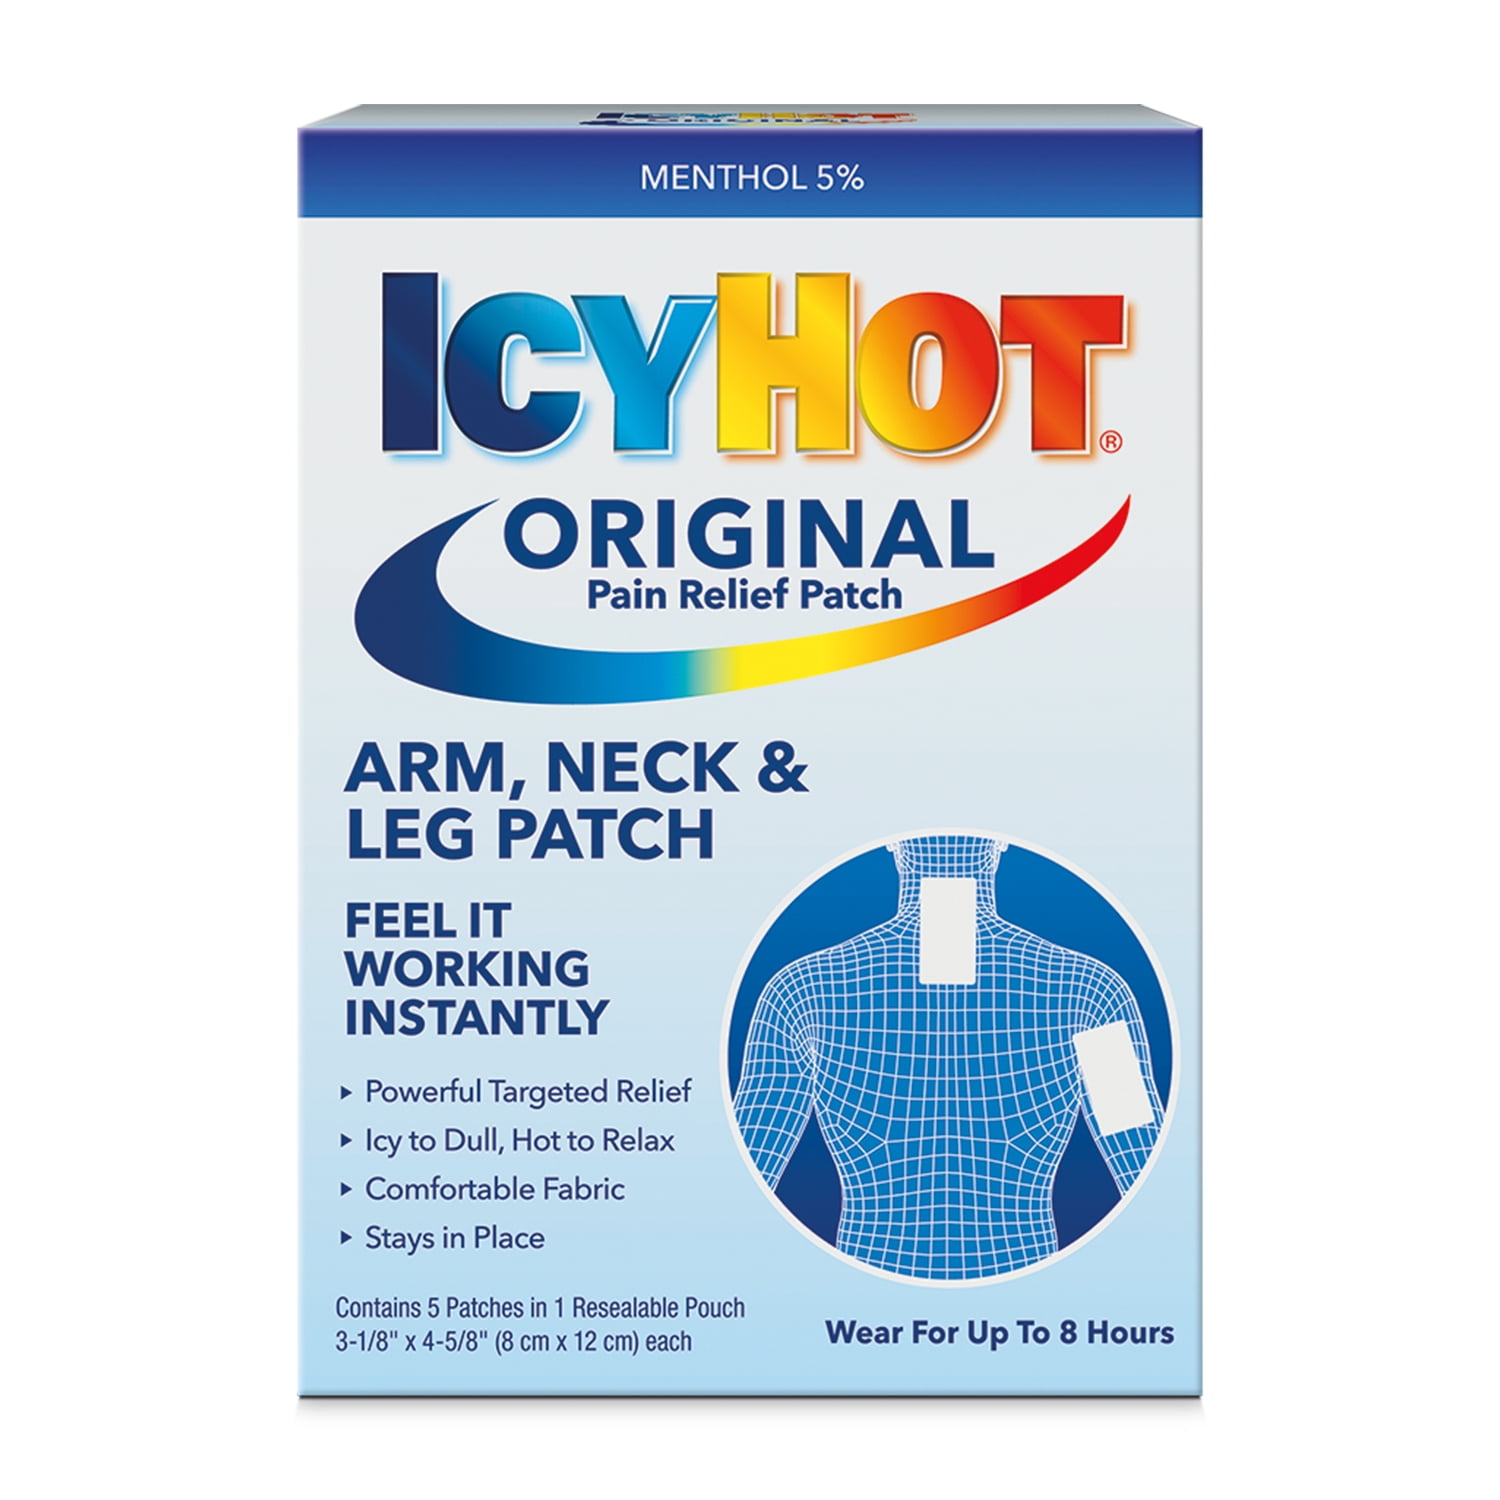 Icy Hot Original Small Pain Relief Patches (5 Count) Powerful Targeted Relief for Arm, Neck & Leg